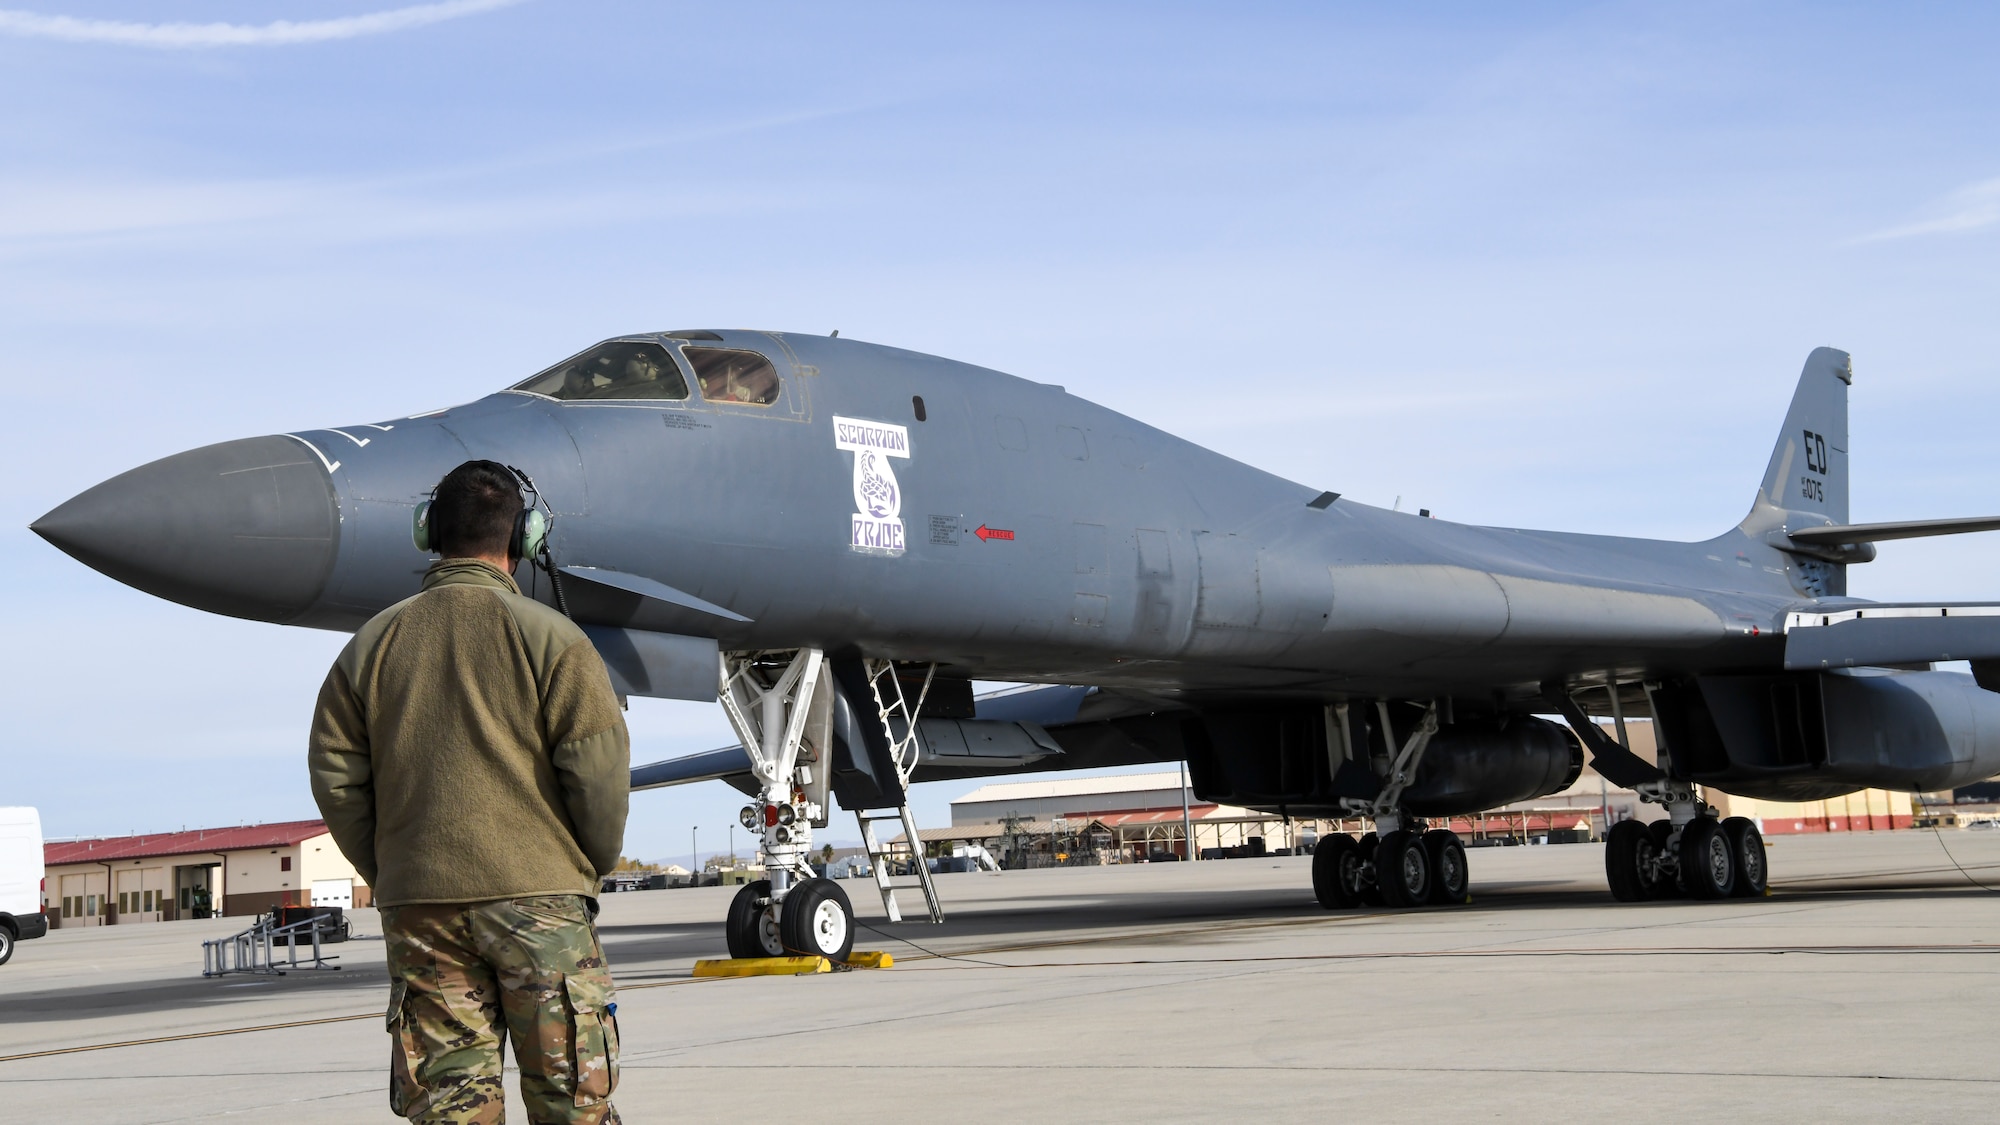 A B-1B Lancer prepares to conduct a captive carry flight to demonstrate its external weapons carriage capabilities at Edwards Air Force Base, California, Nov. 20. (Air Force photo by 2nd Lt. Christine Saunders)